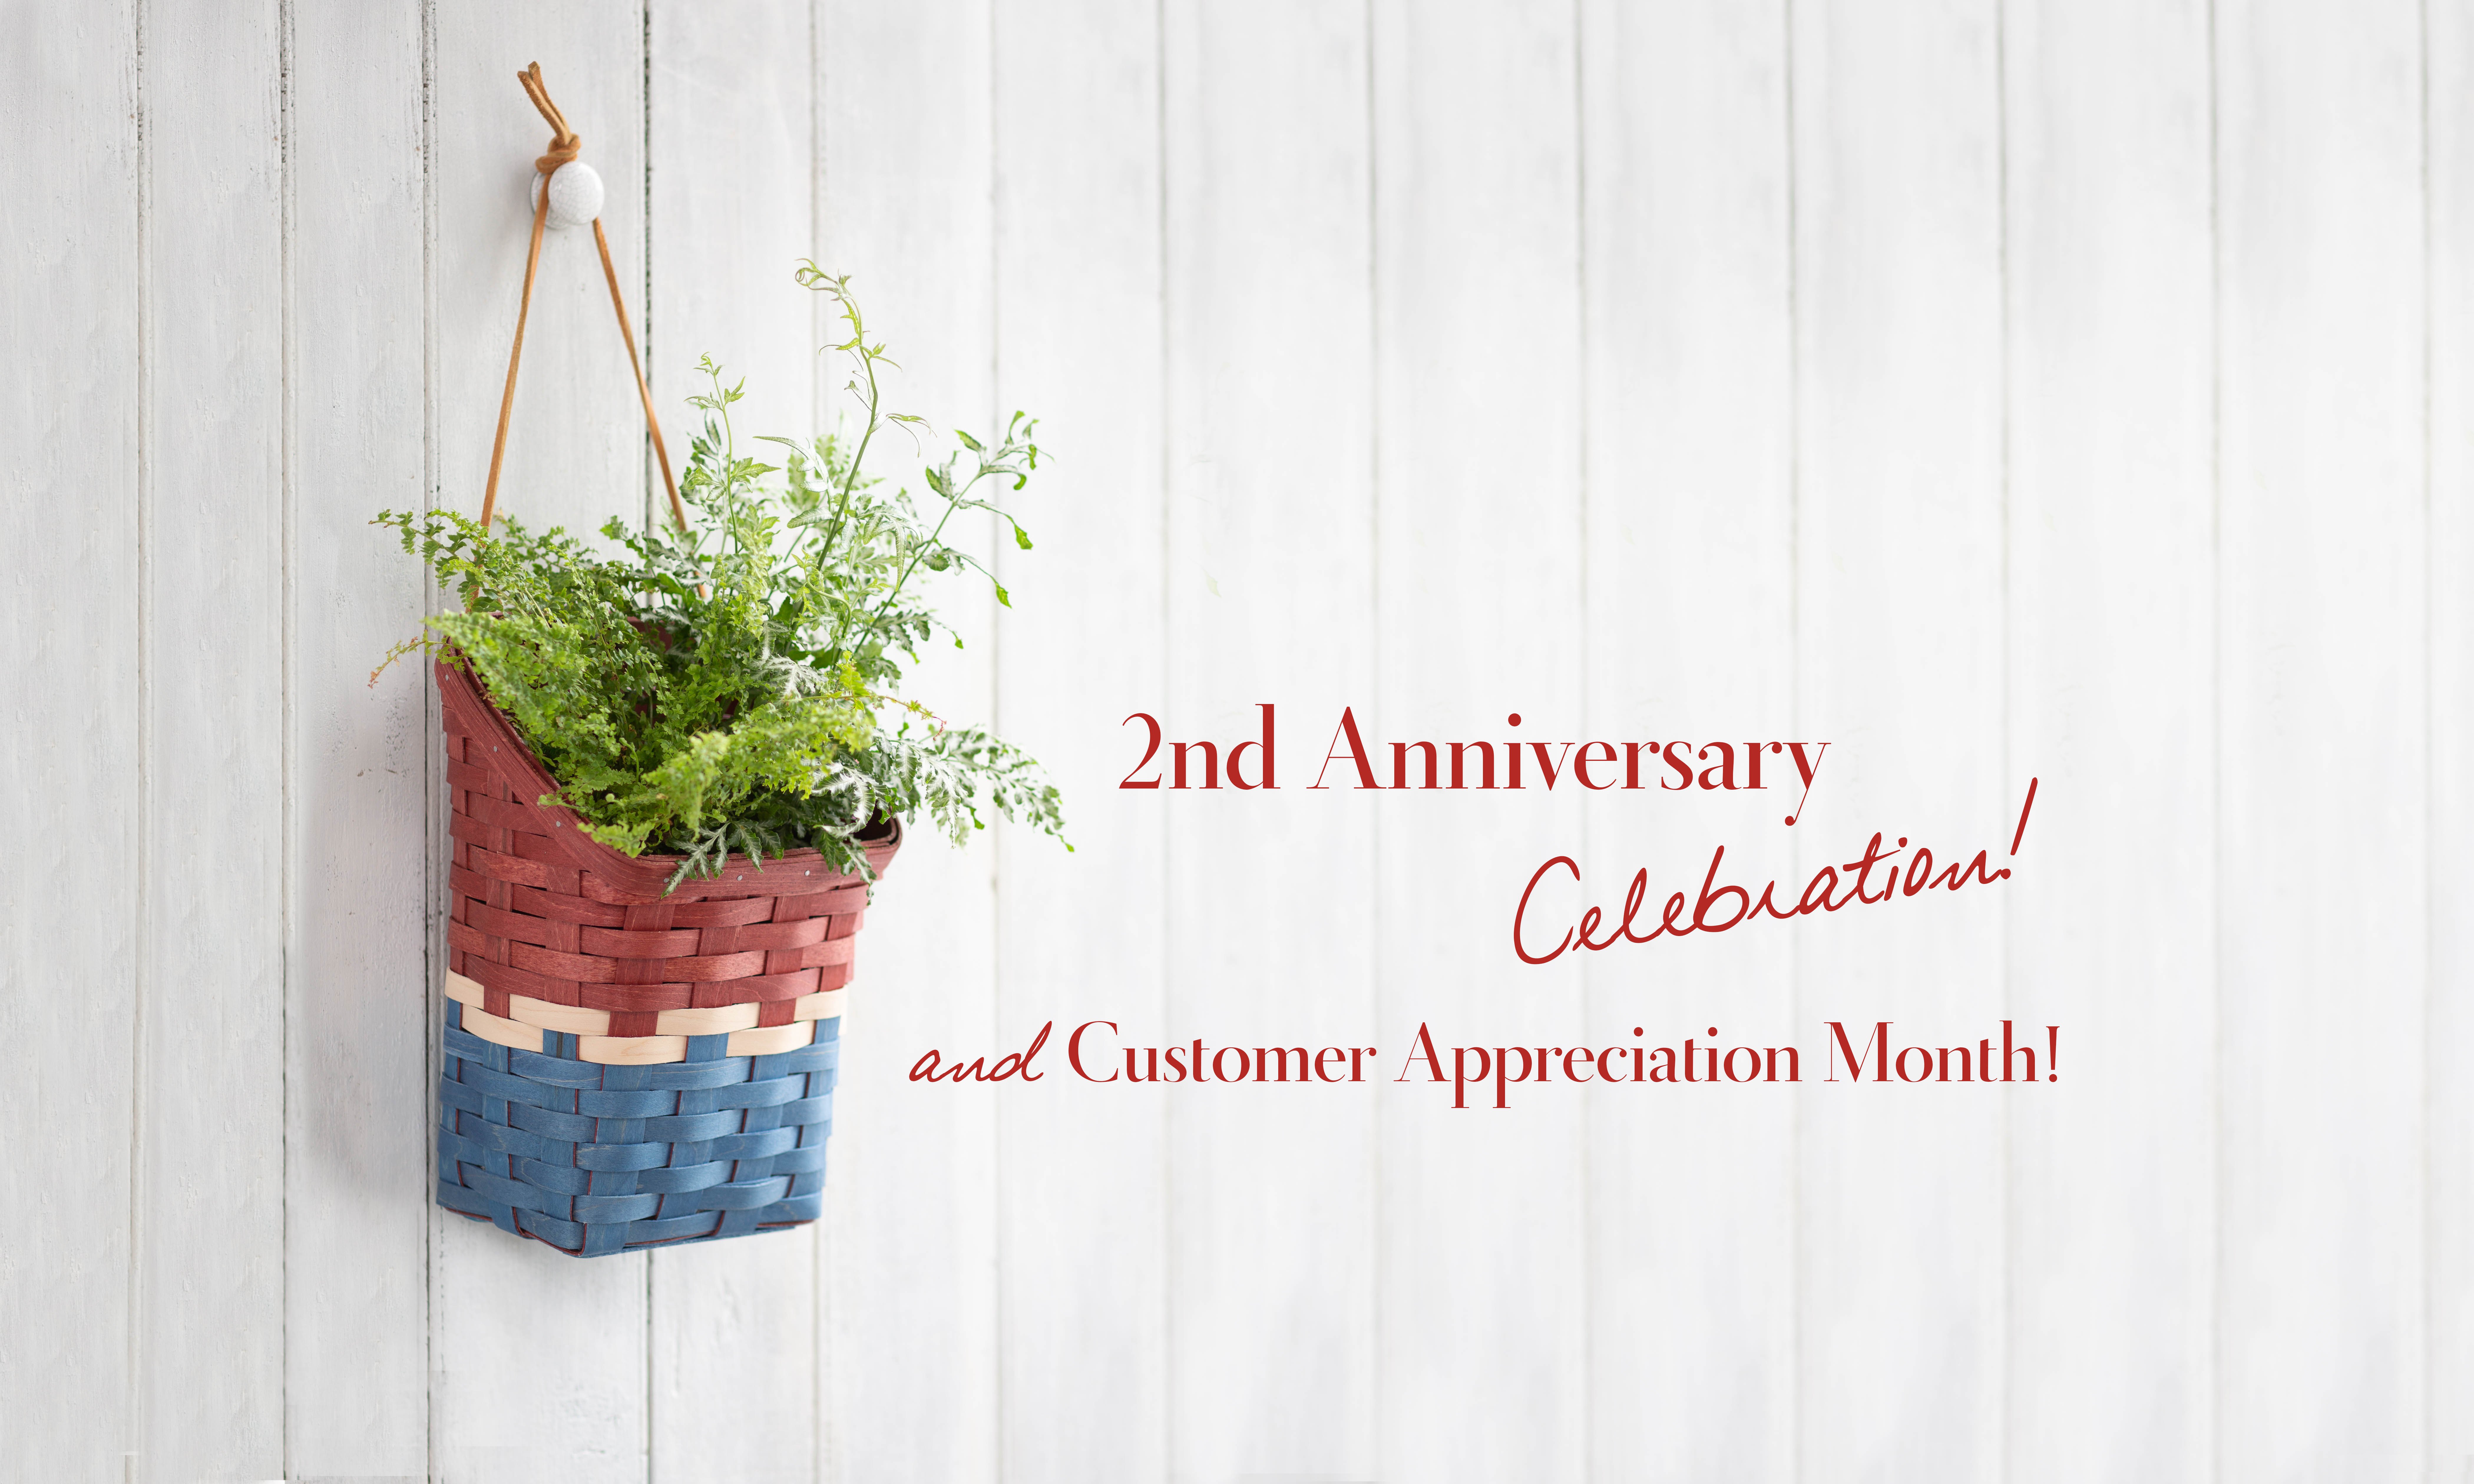 Customer Appreciation is Every Single Day